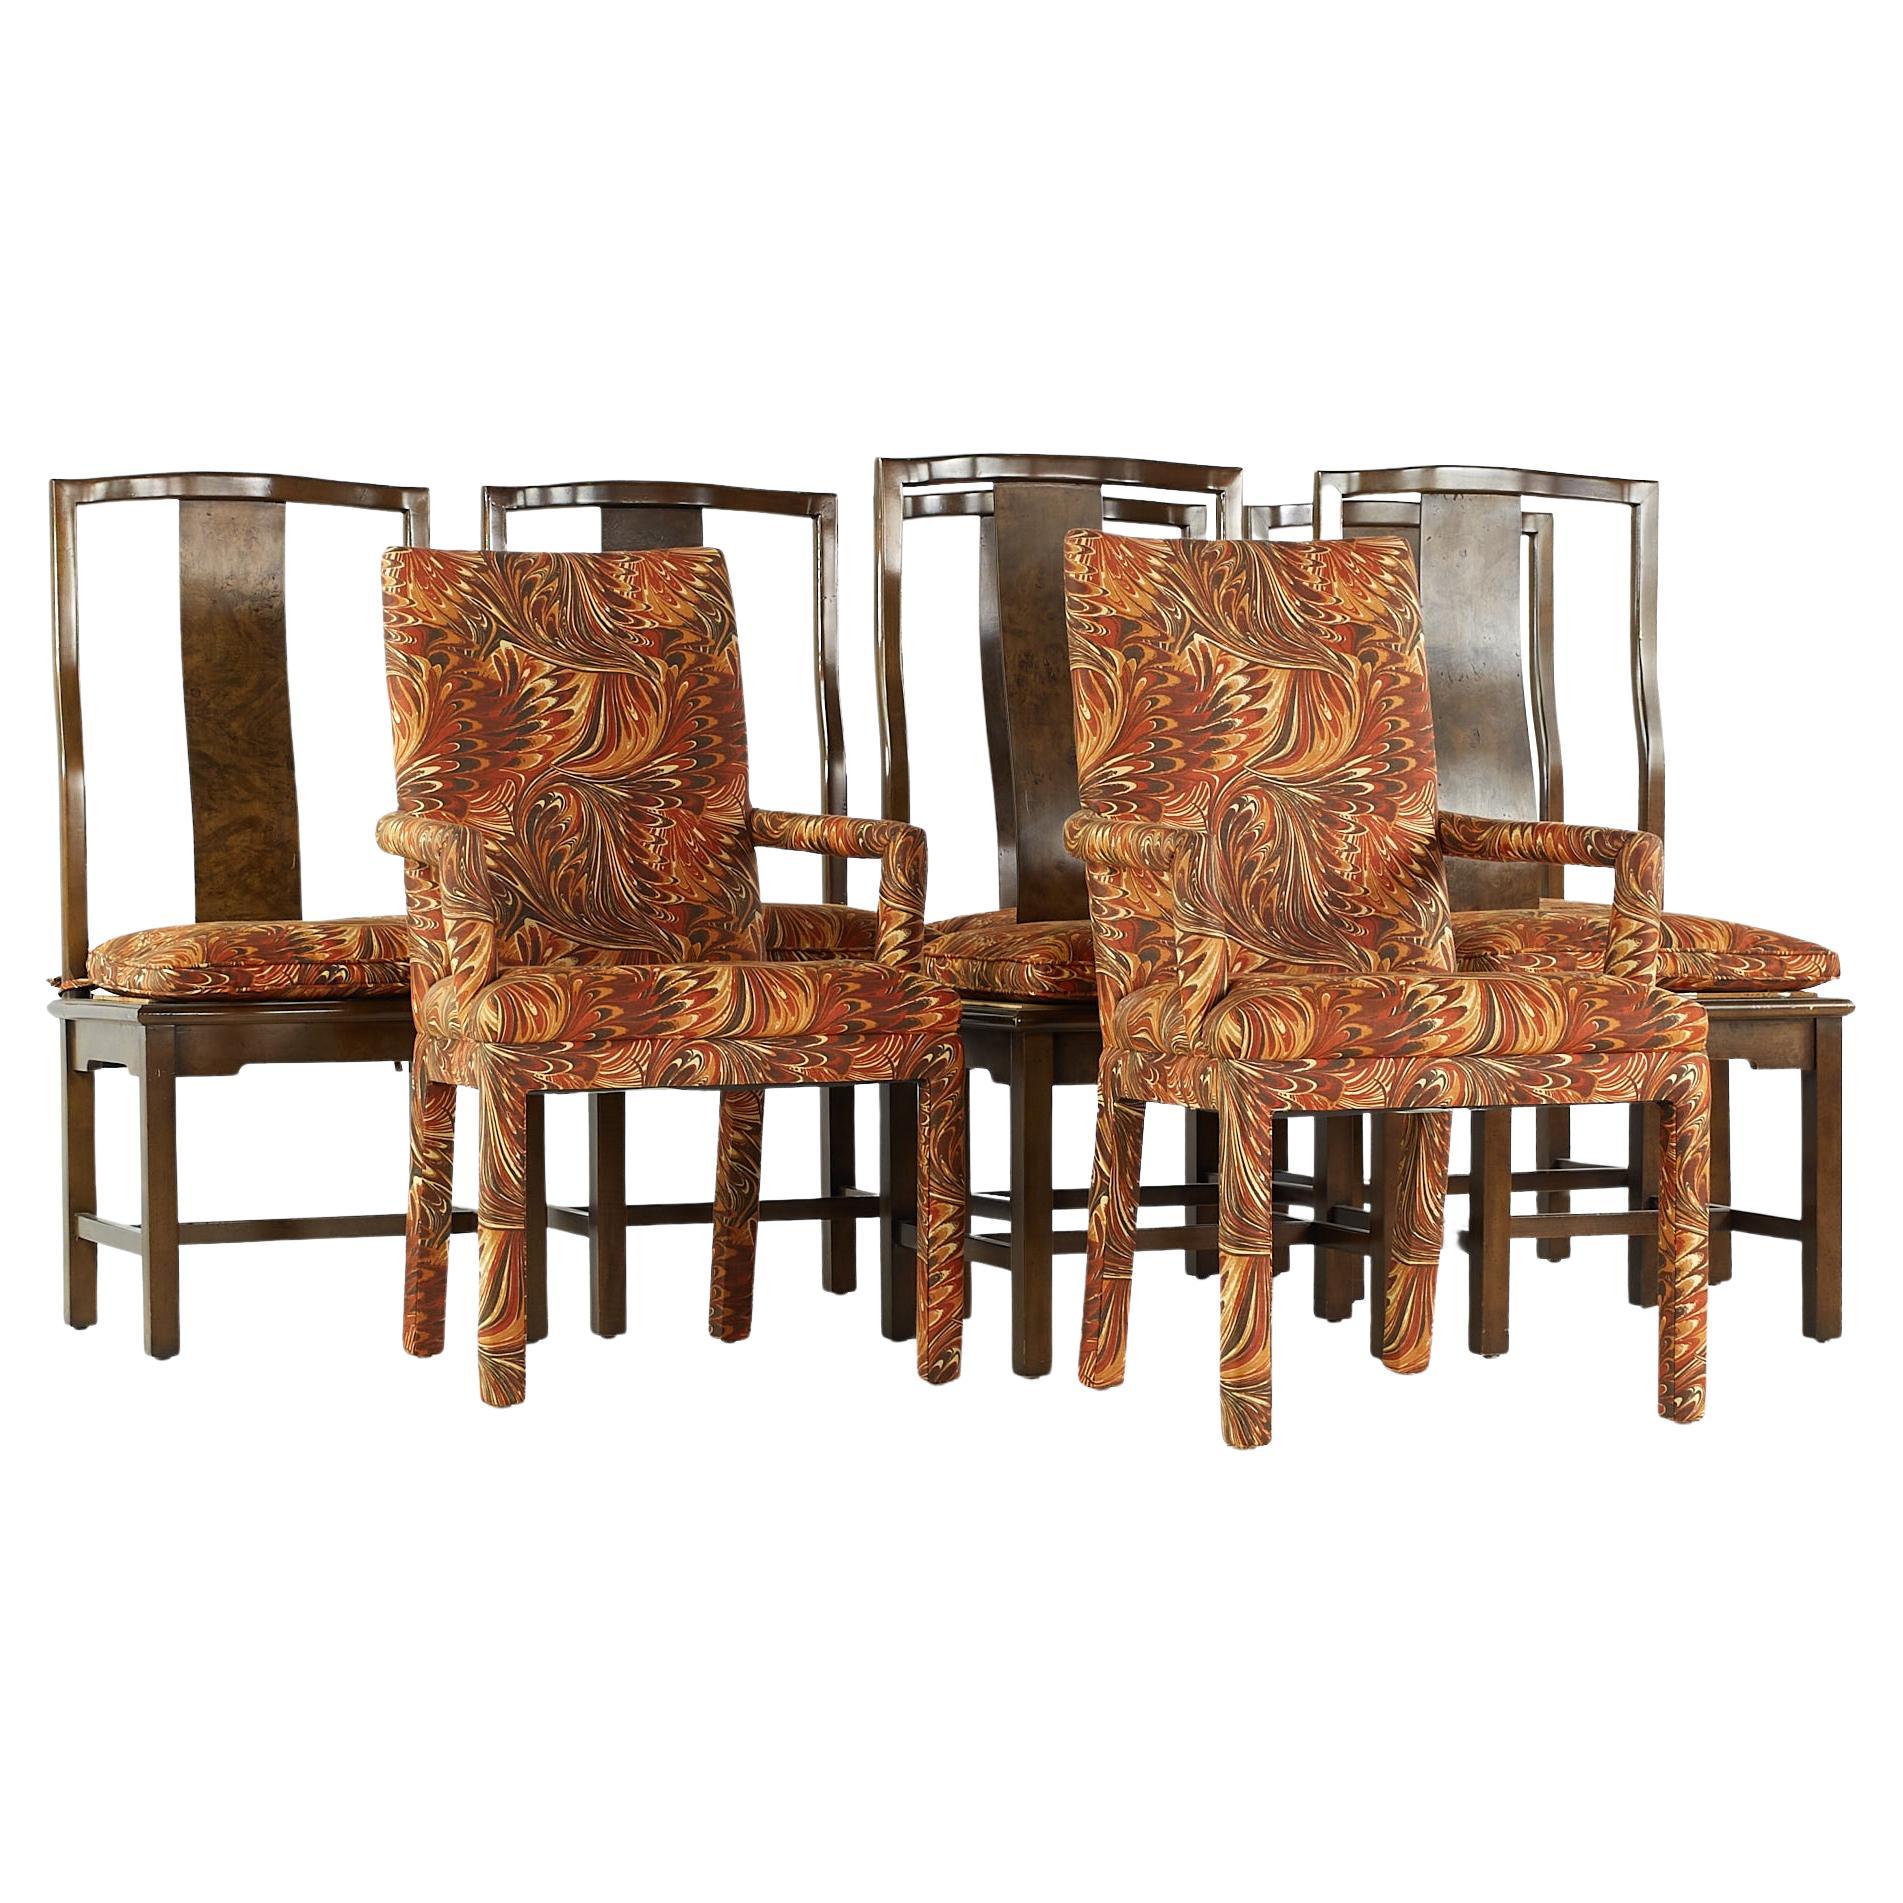 Tomlinson Mid-Century Walnut and Burlwood Dining Chairs, Set of 8 For Sale